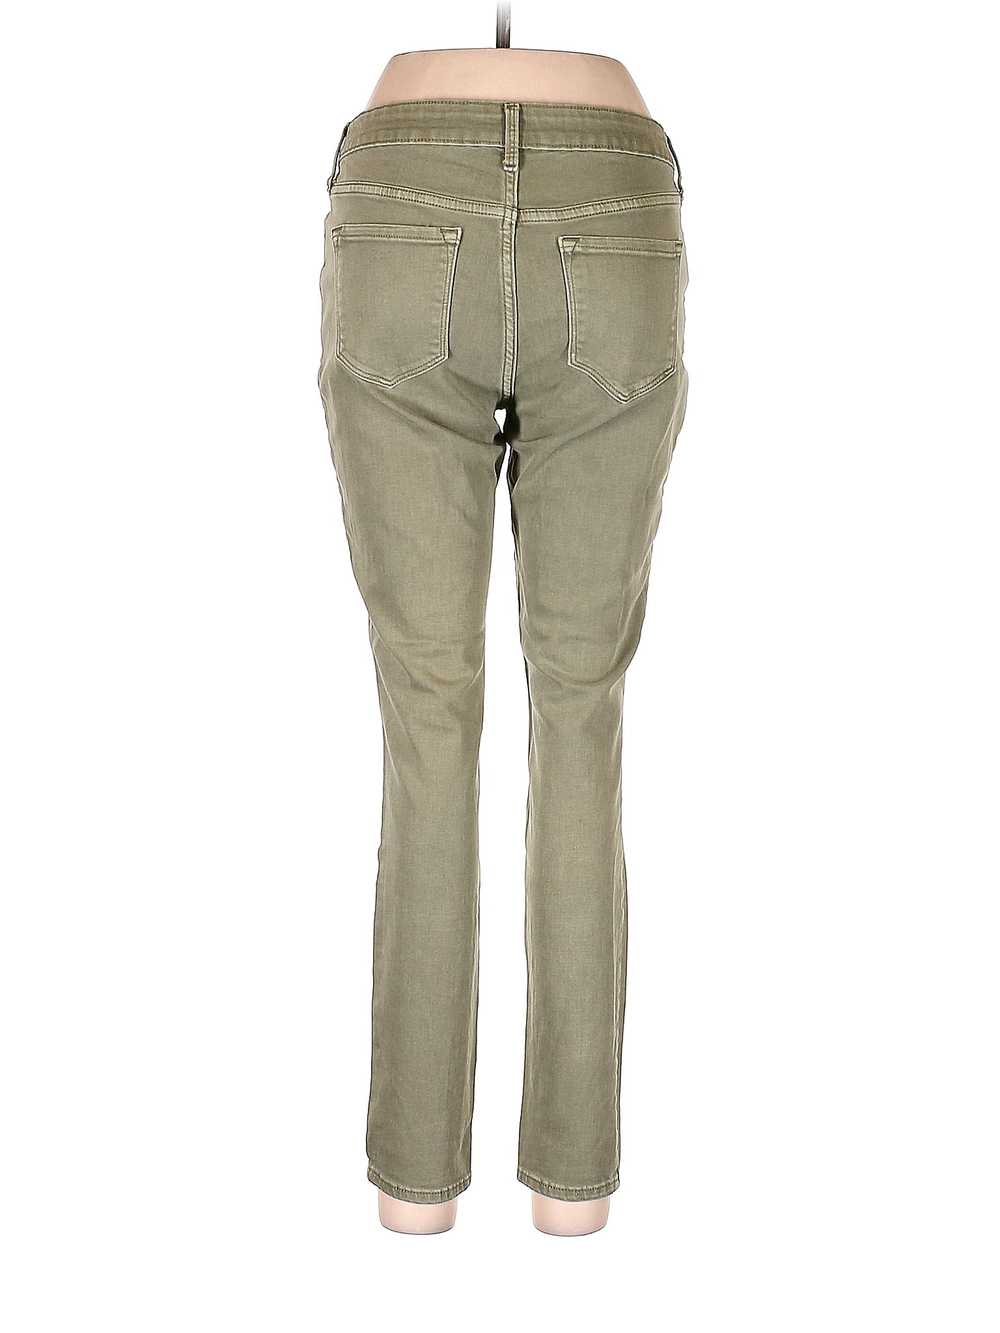 Old Navy Women Green Jeans 10 - image 2